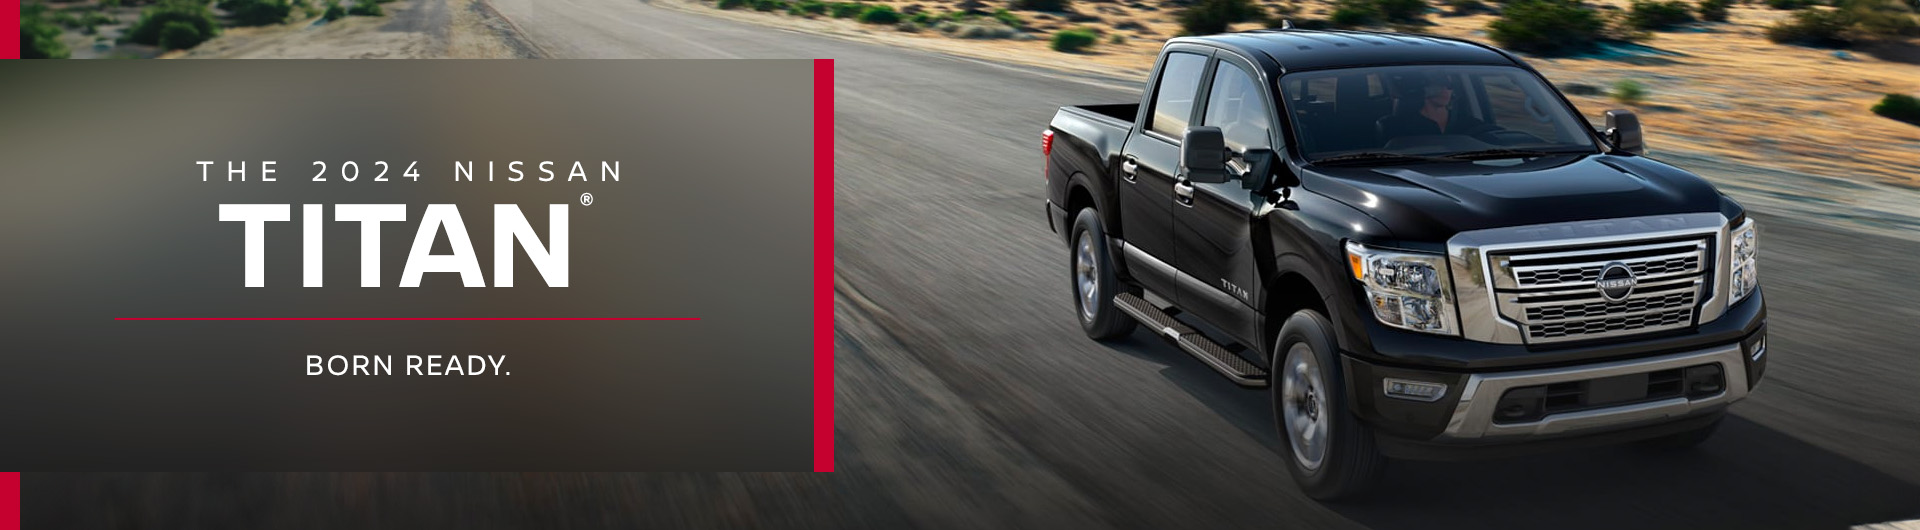 A New Nissan Titan® Available at Younger Nissan of Frederick in Frederick, MD